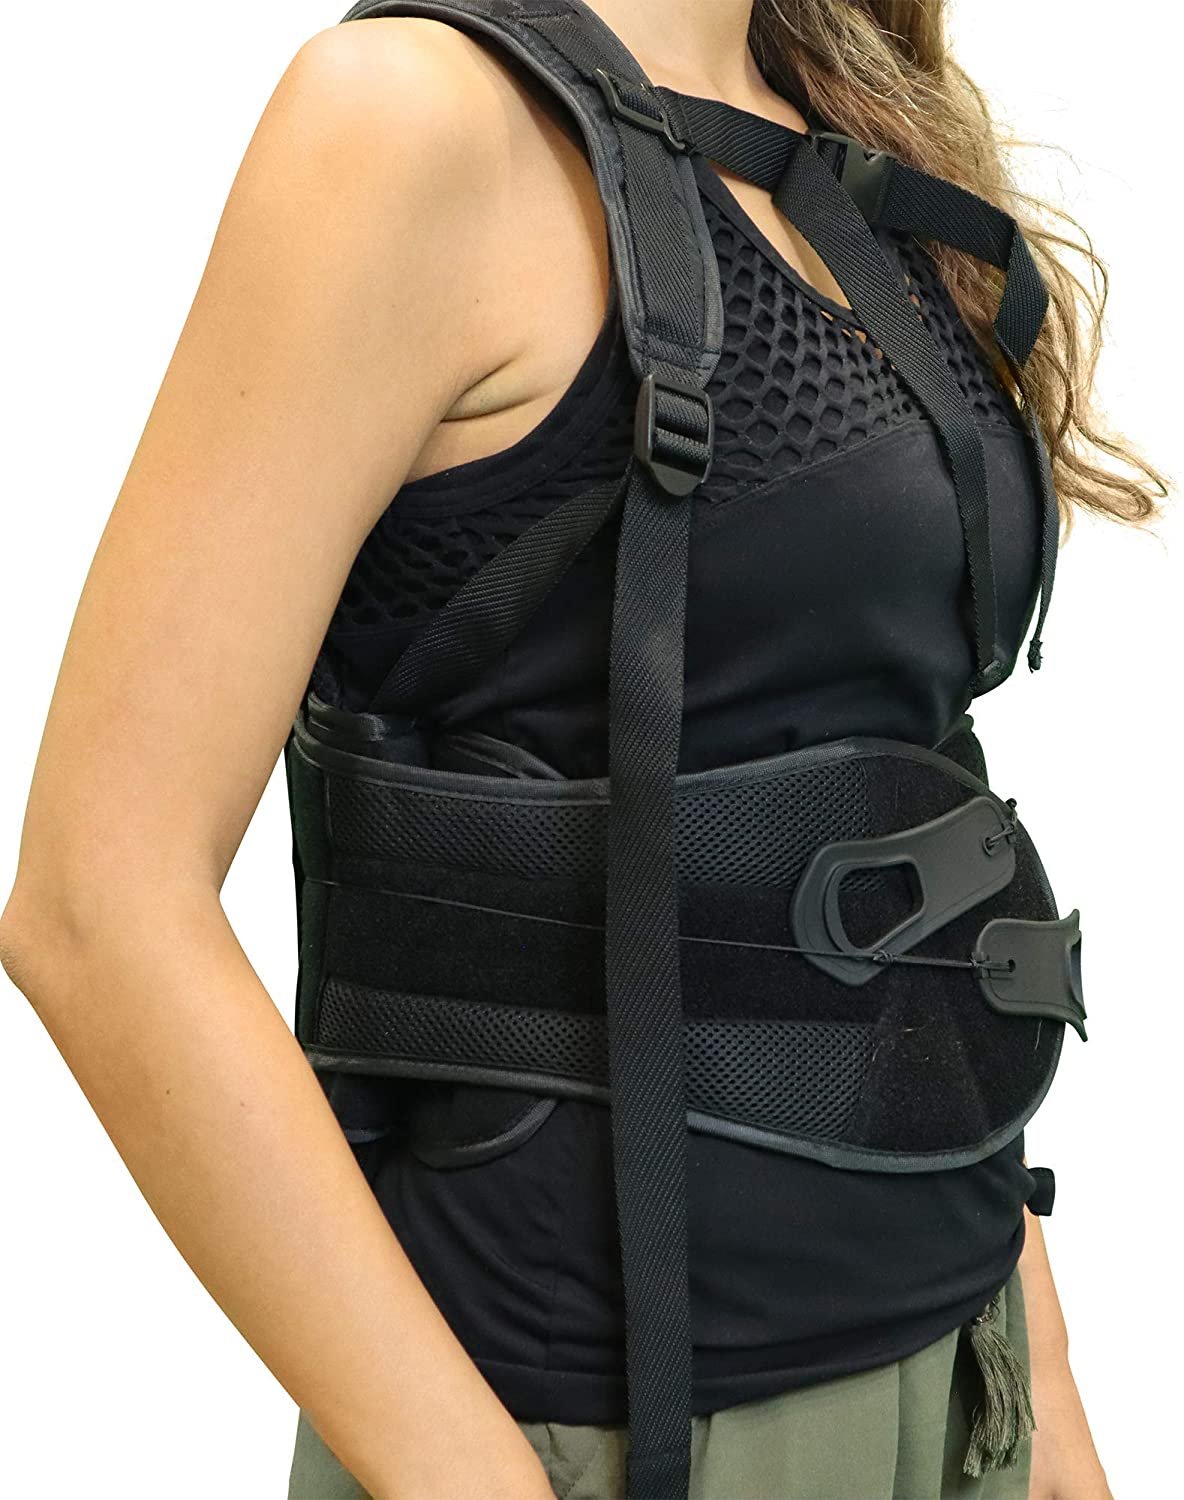 Mars Wellness TLSO Medical Back Brace - PDAC L0456 L0457 - Thoracic Back Brace - Pain Relief Straightener for DDD, Spinal Trauma, Osteoprosis, Fractures, Post Op - Mars Med Supply